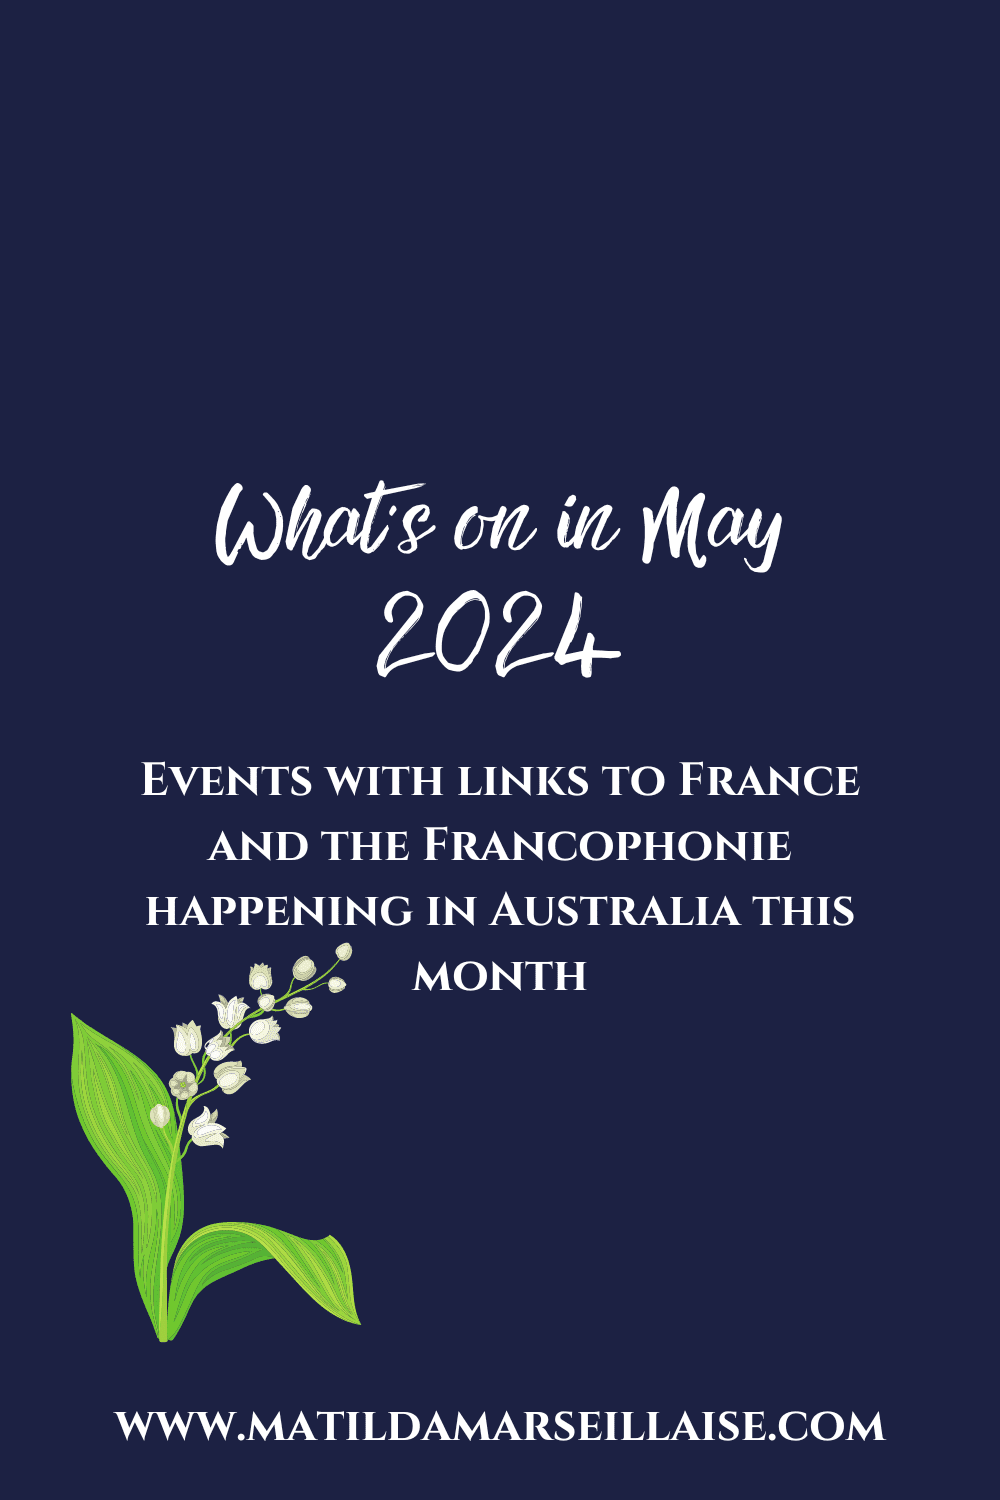 What’s on in May 2024 – French and Francophone linked events in Australia